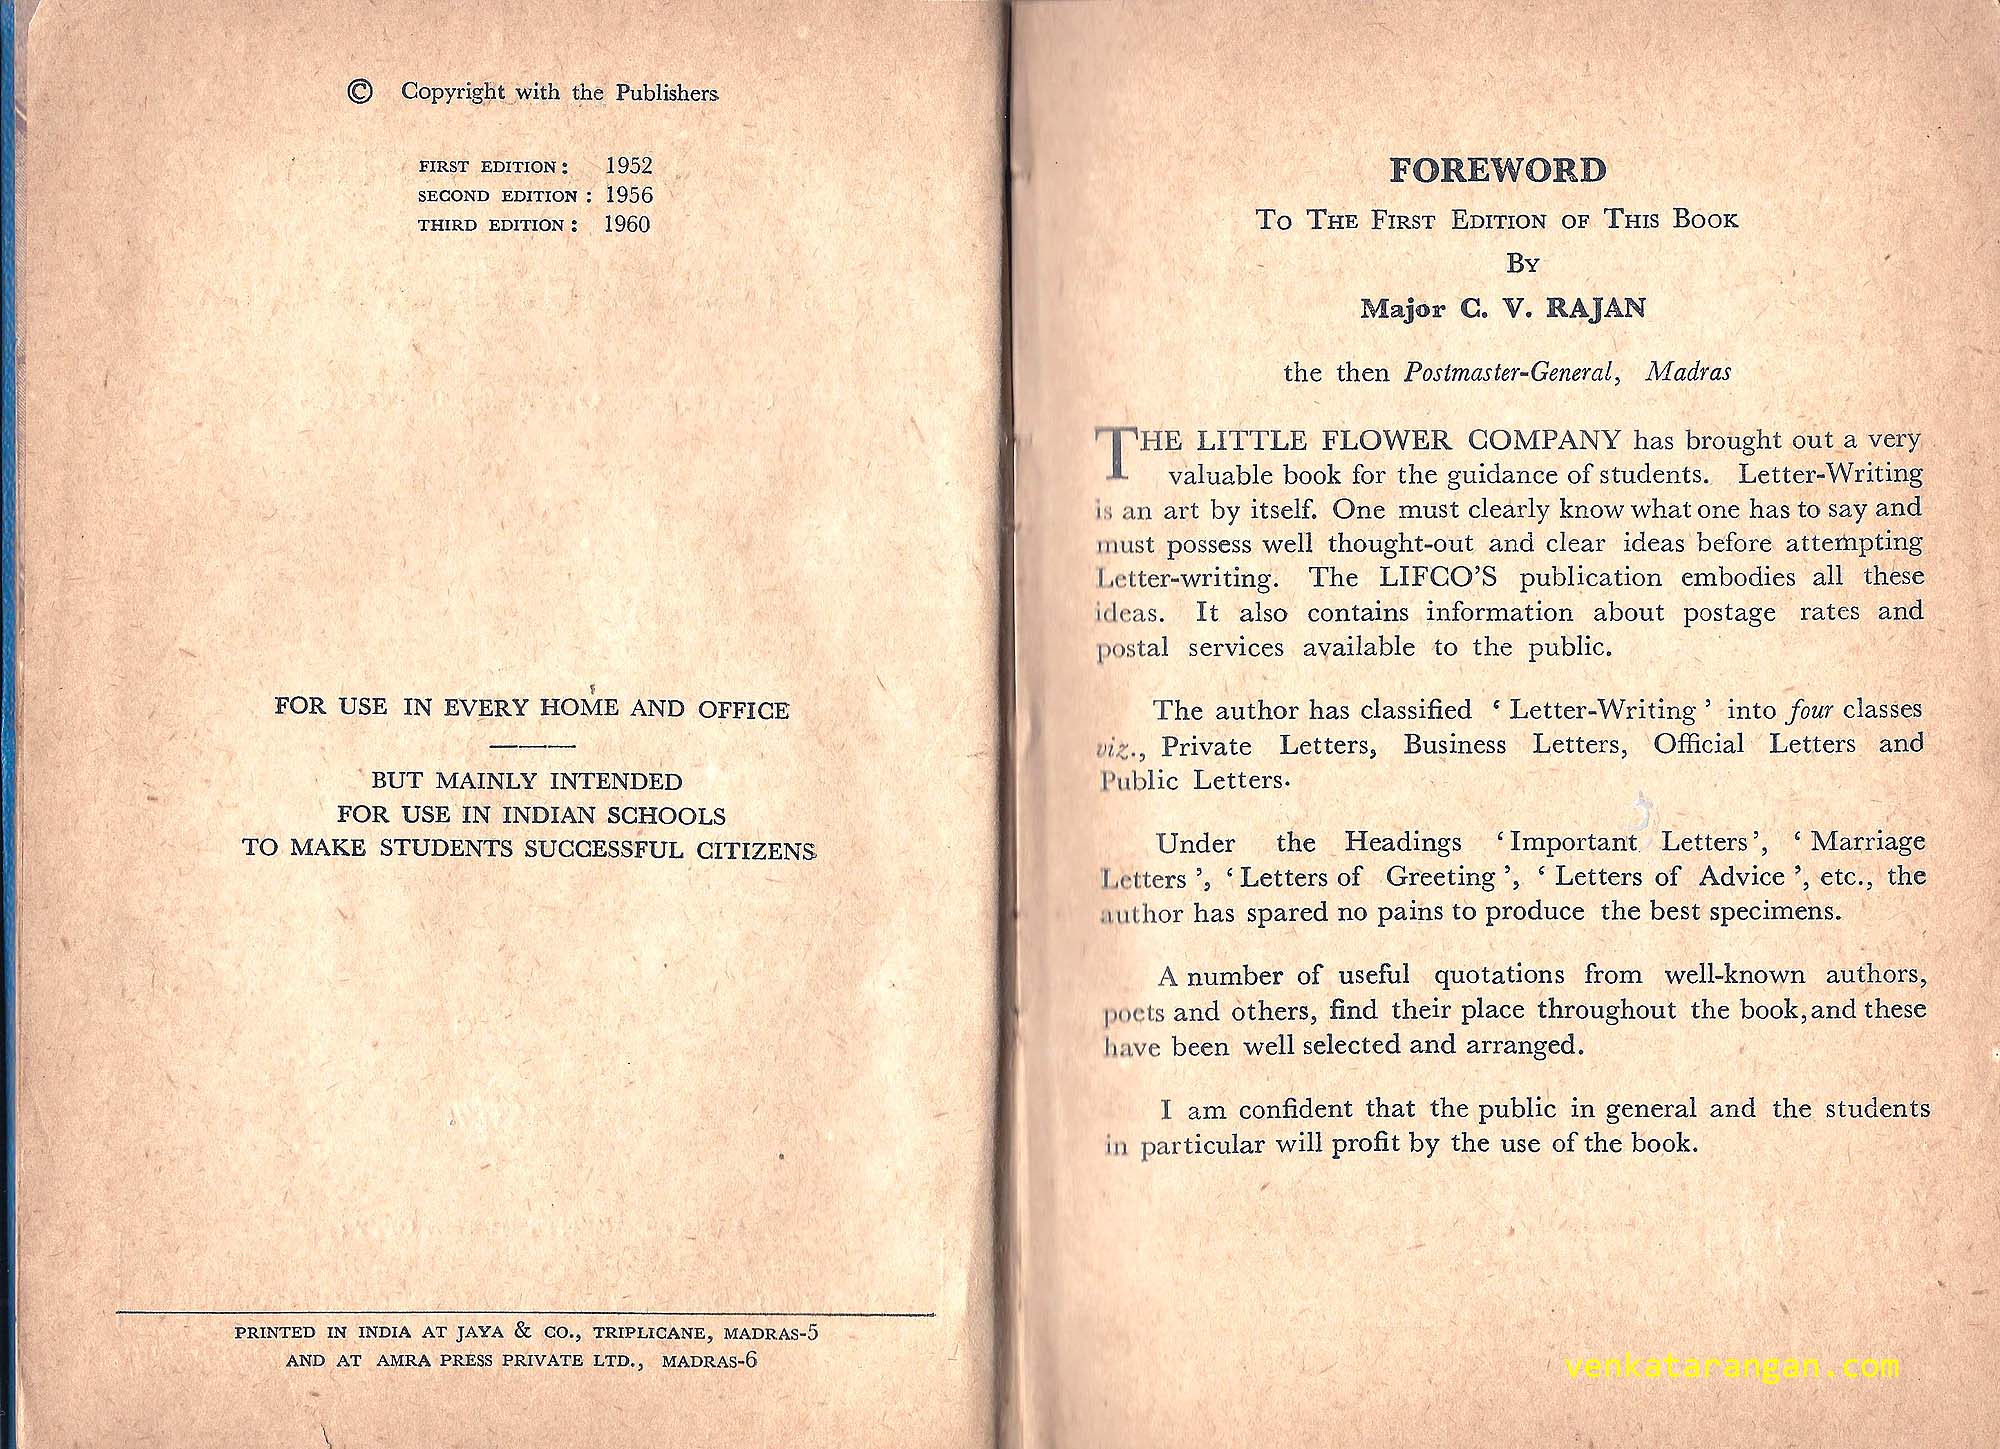 Foreword by Major C.V.Rajan, then Postmaster-General, Madras. First Edition: 1952. For use in every home and office. But mainly intended for use in Indian schools to make students successful citizens.